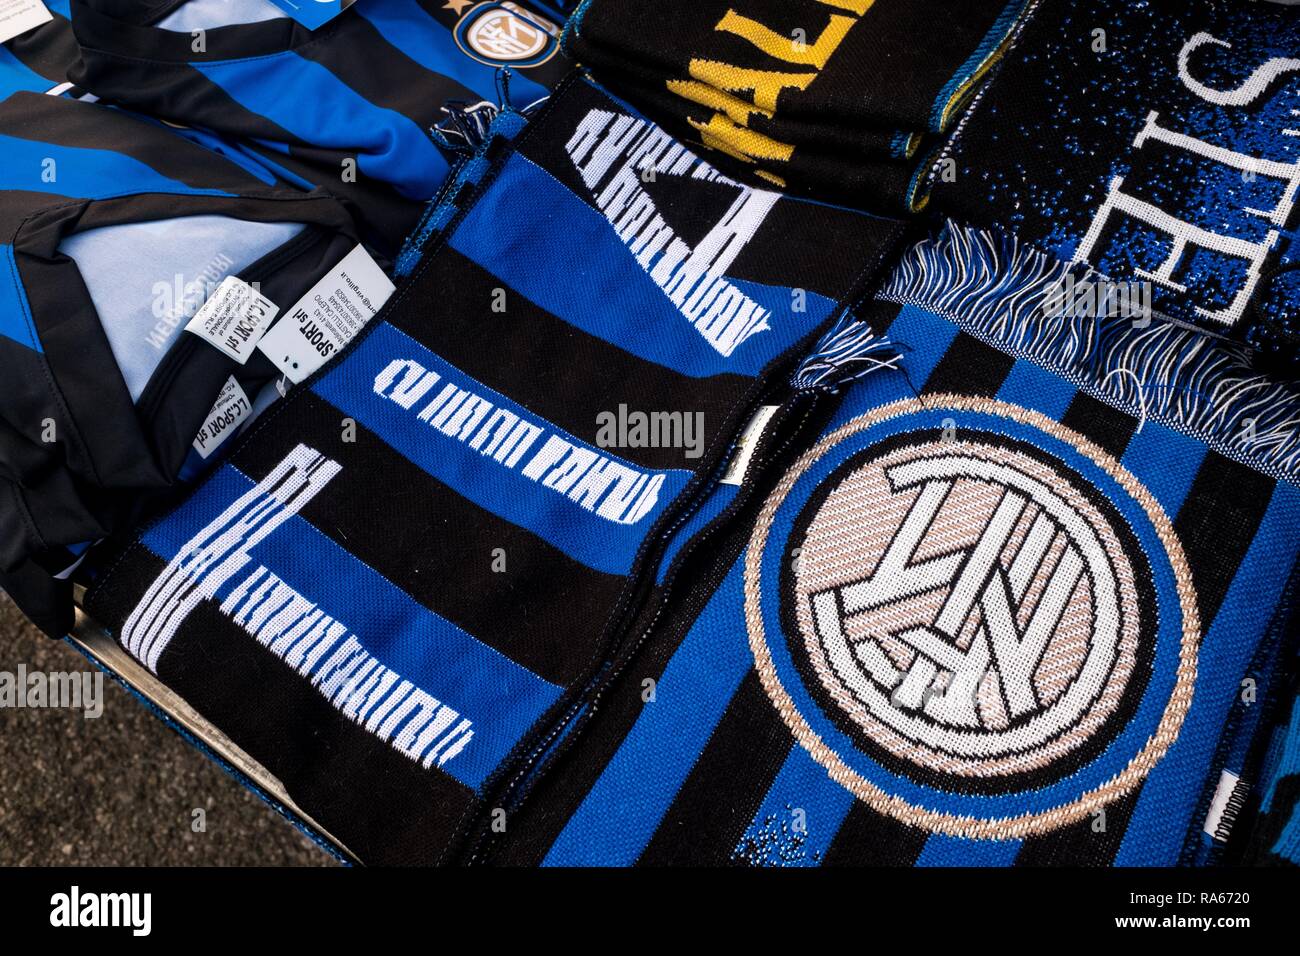 Milan, Italy. 1st January, 2019. Milan, Inter and Juventus t-shirts and gadgets for sale at a street vendor in front of the San Siro stadium, on January 01 2019 Credit: Mairo Cinquetti/Alamy Live News Stock Photo